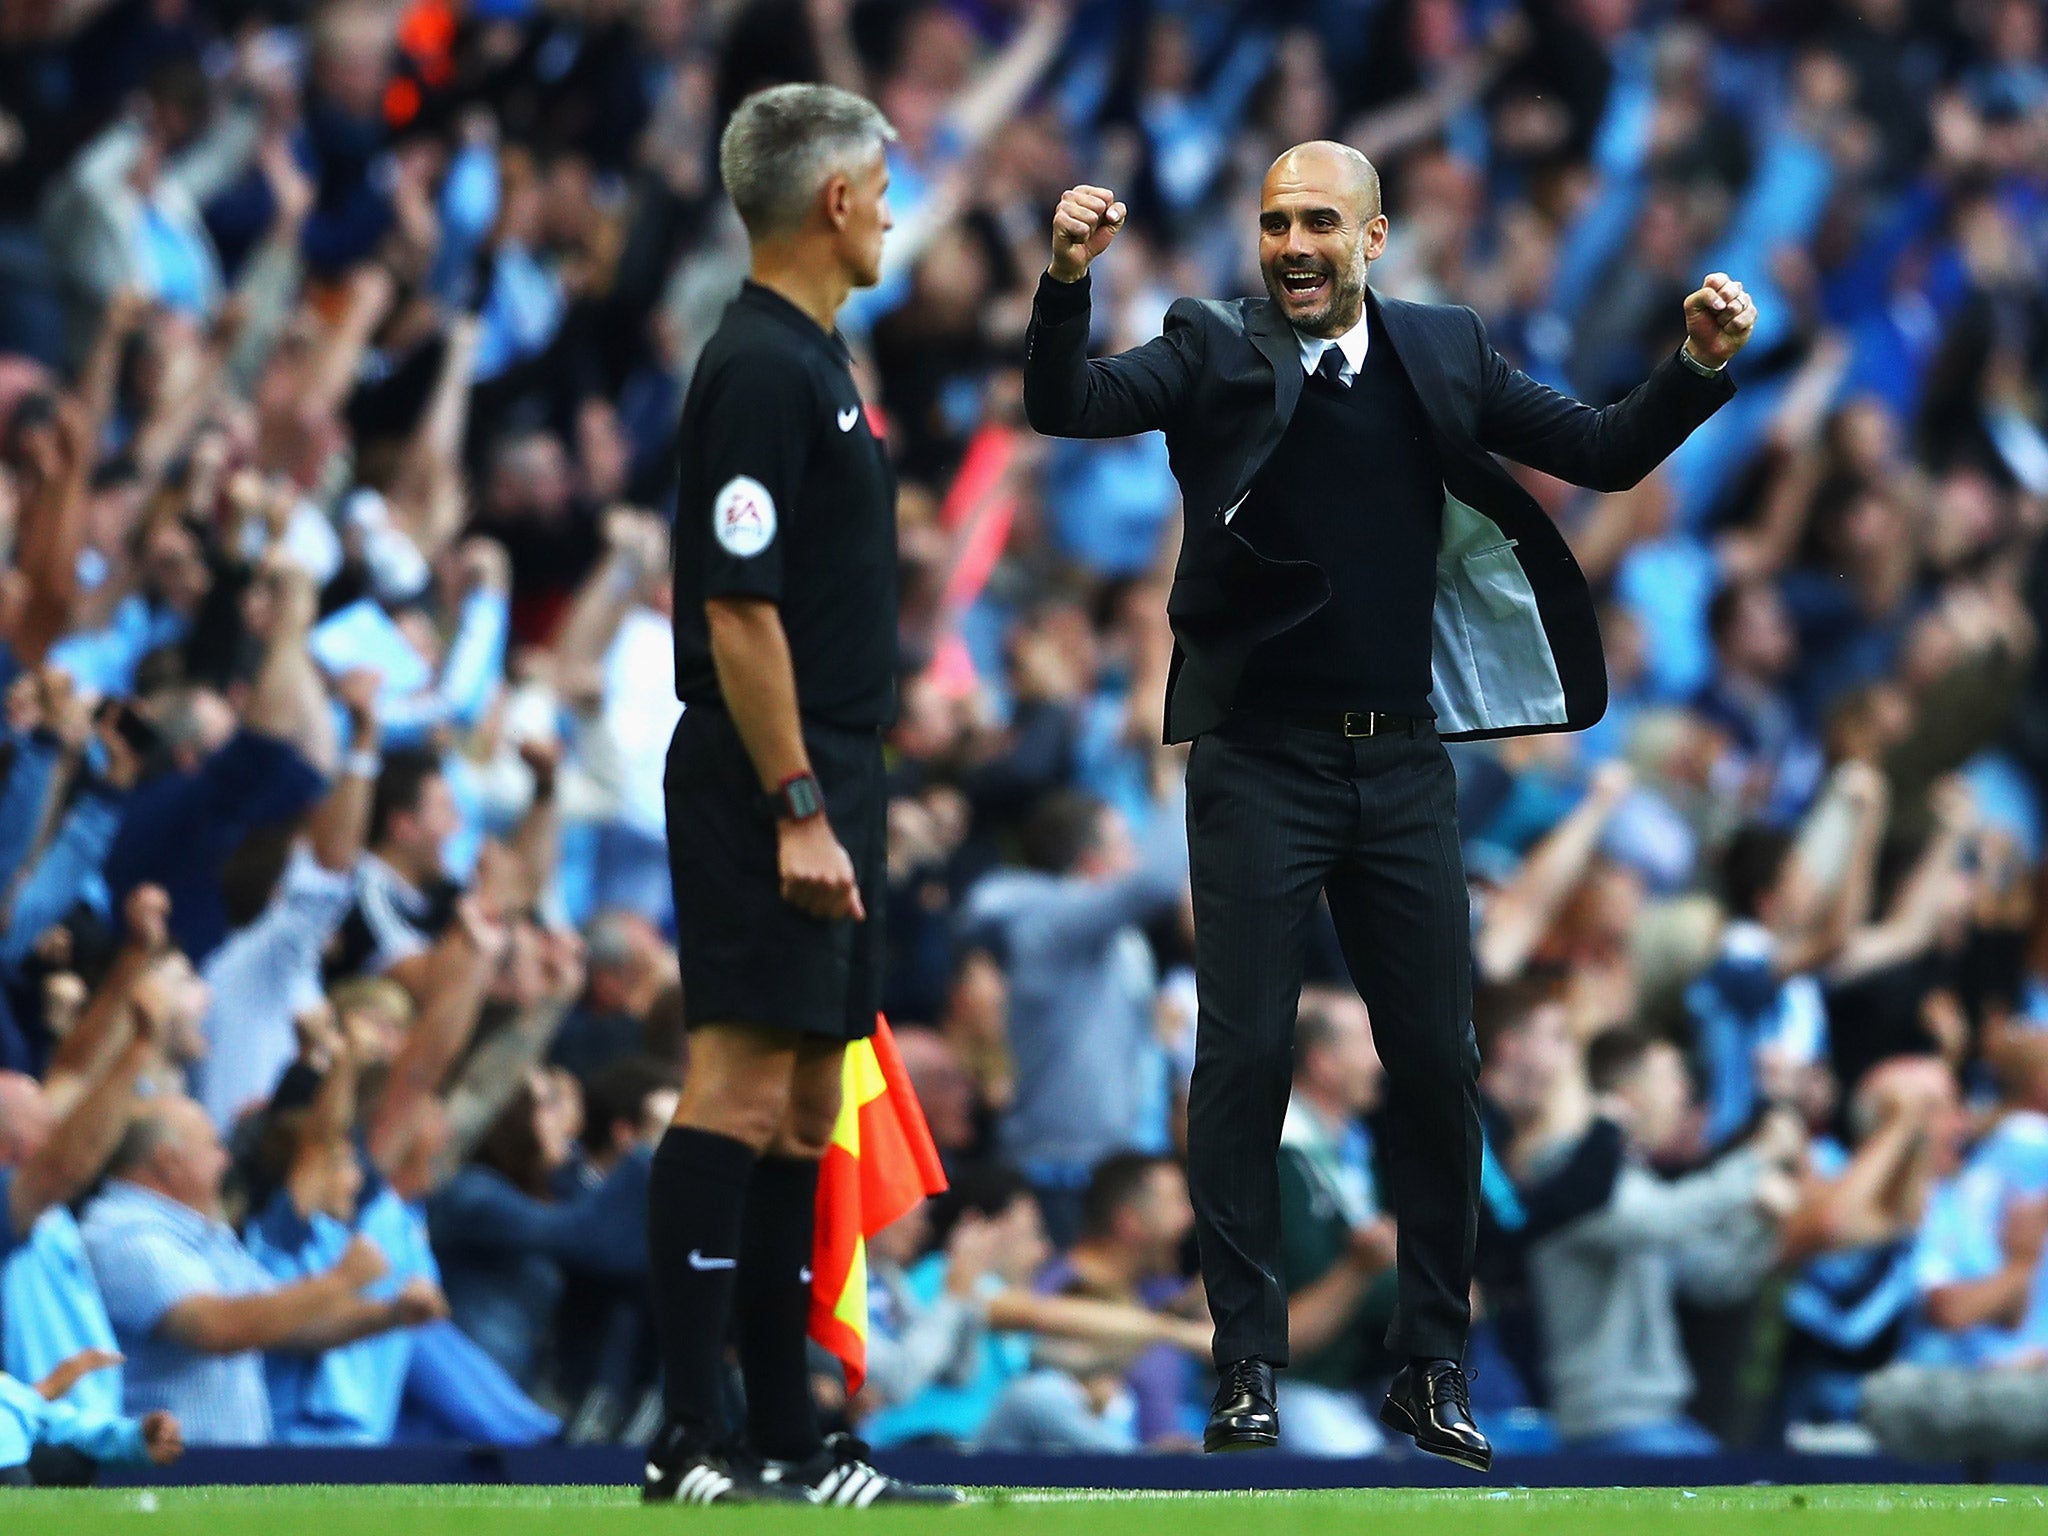 Pep Guardiola celebrates after Paddy McNair's own-goal gave Manchester City victory over Sunderland